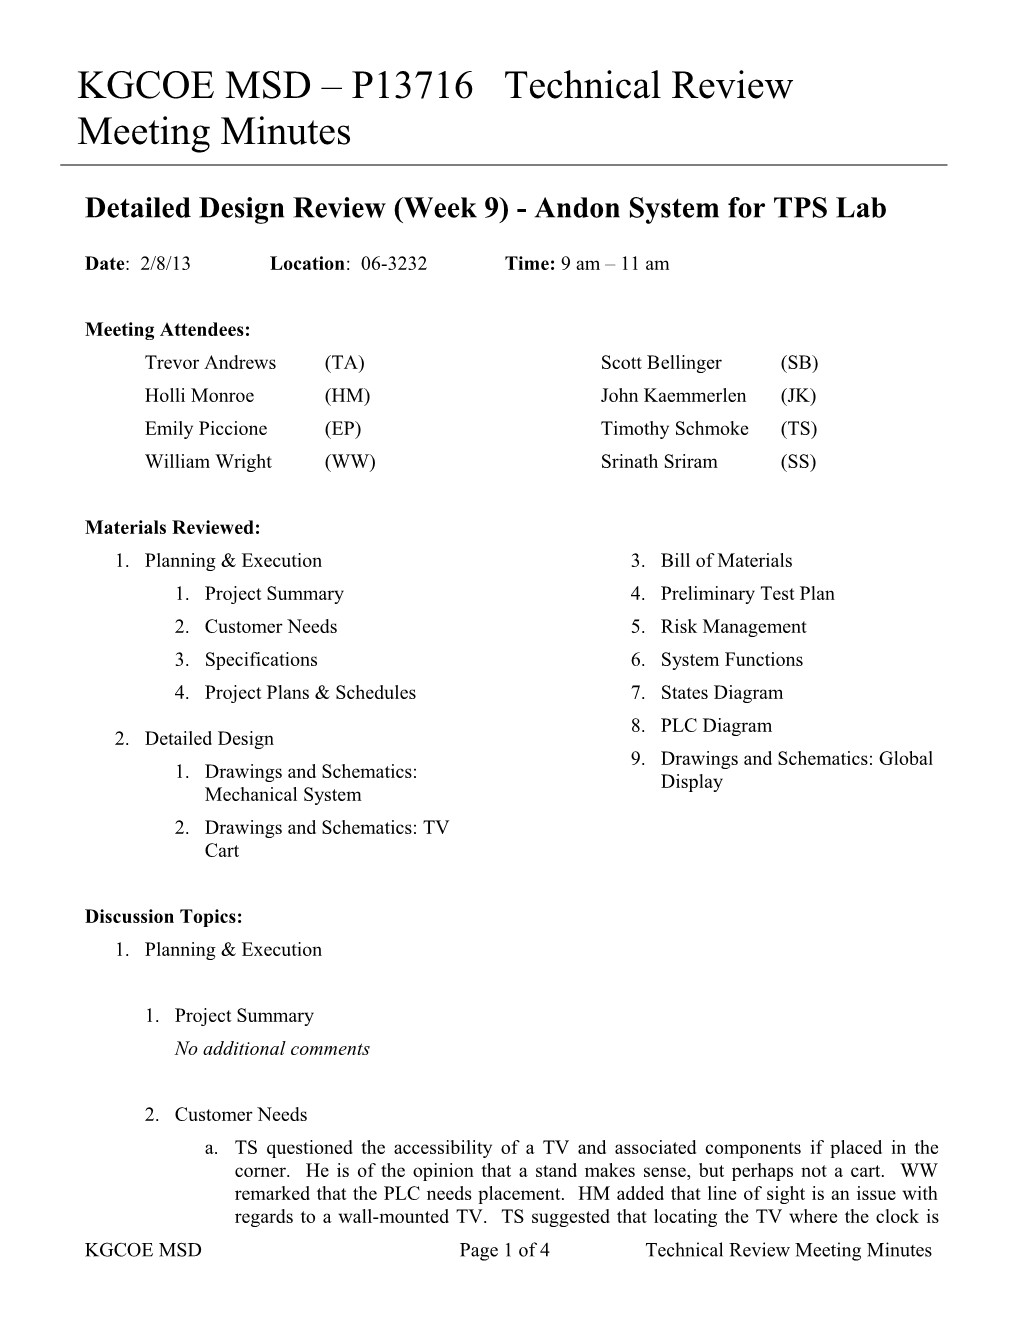 Detailed Design Review (Week 9) - Andon System for TPS Lab